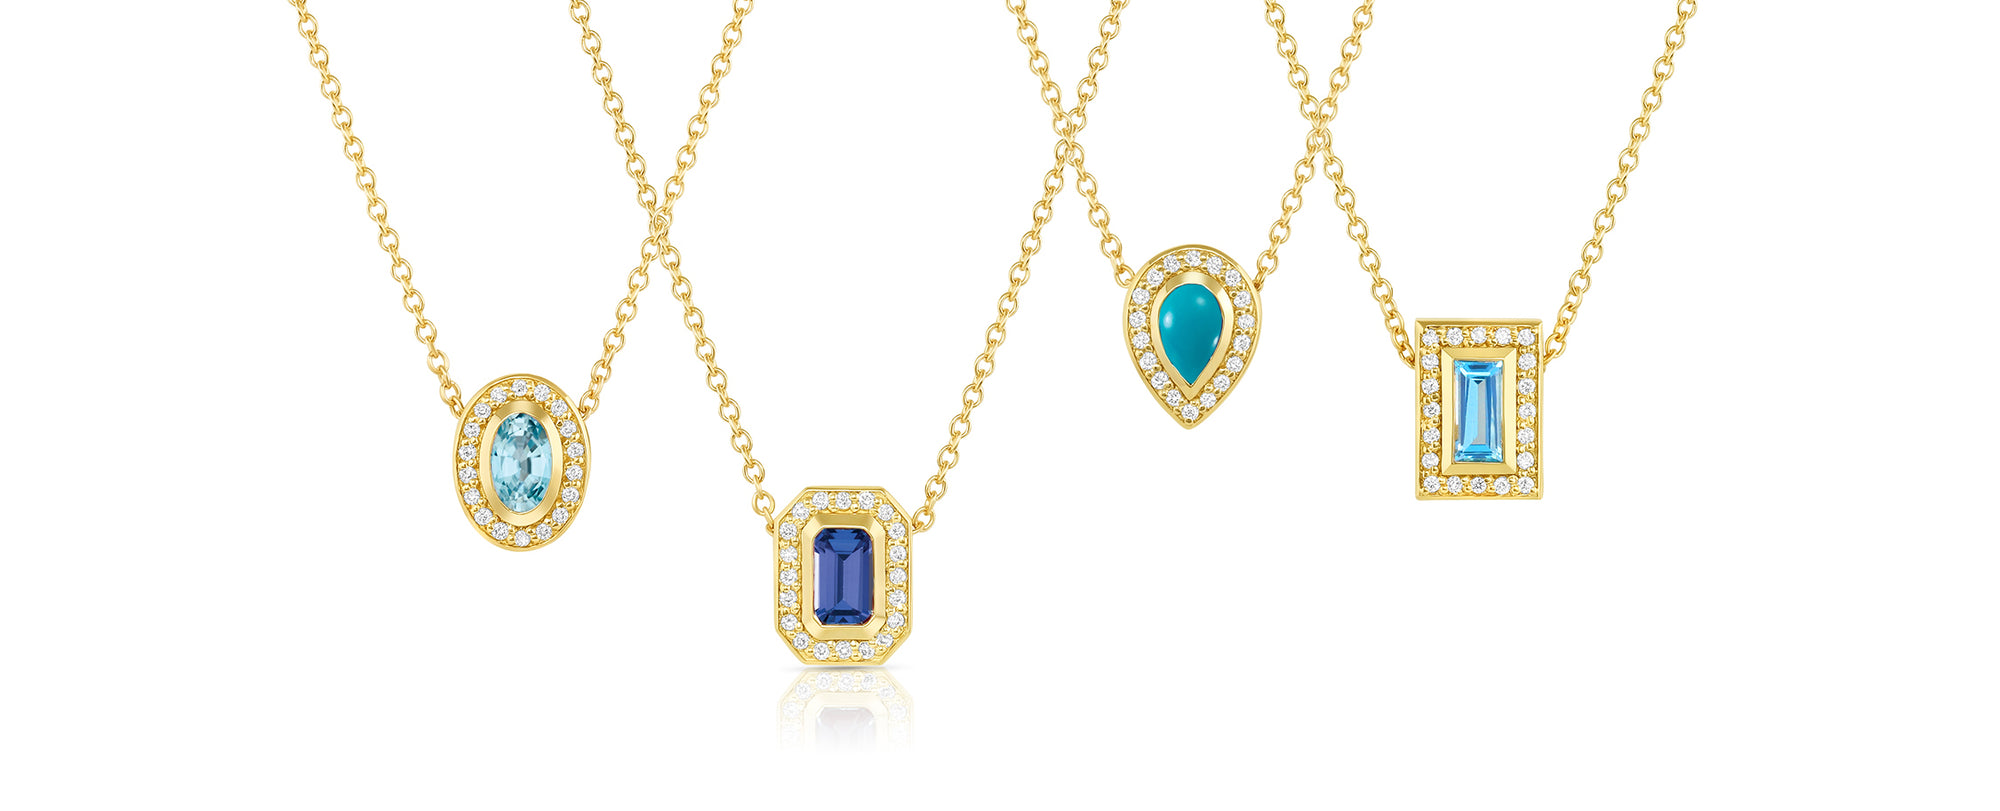 December Birthstones: Who is the Fairest of them All?